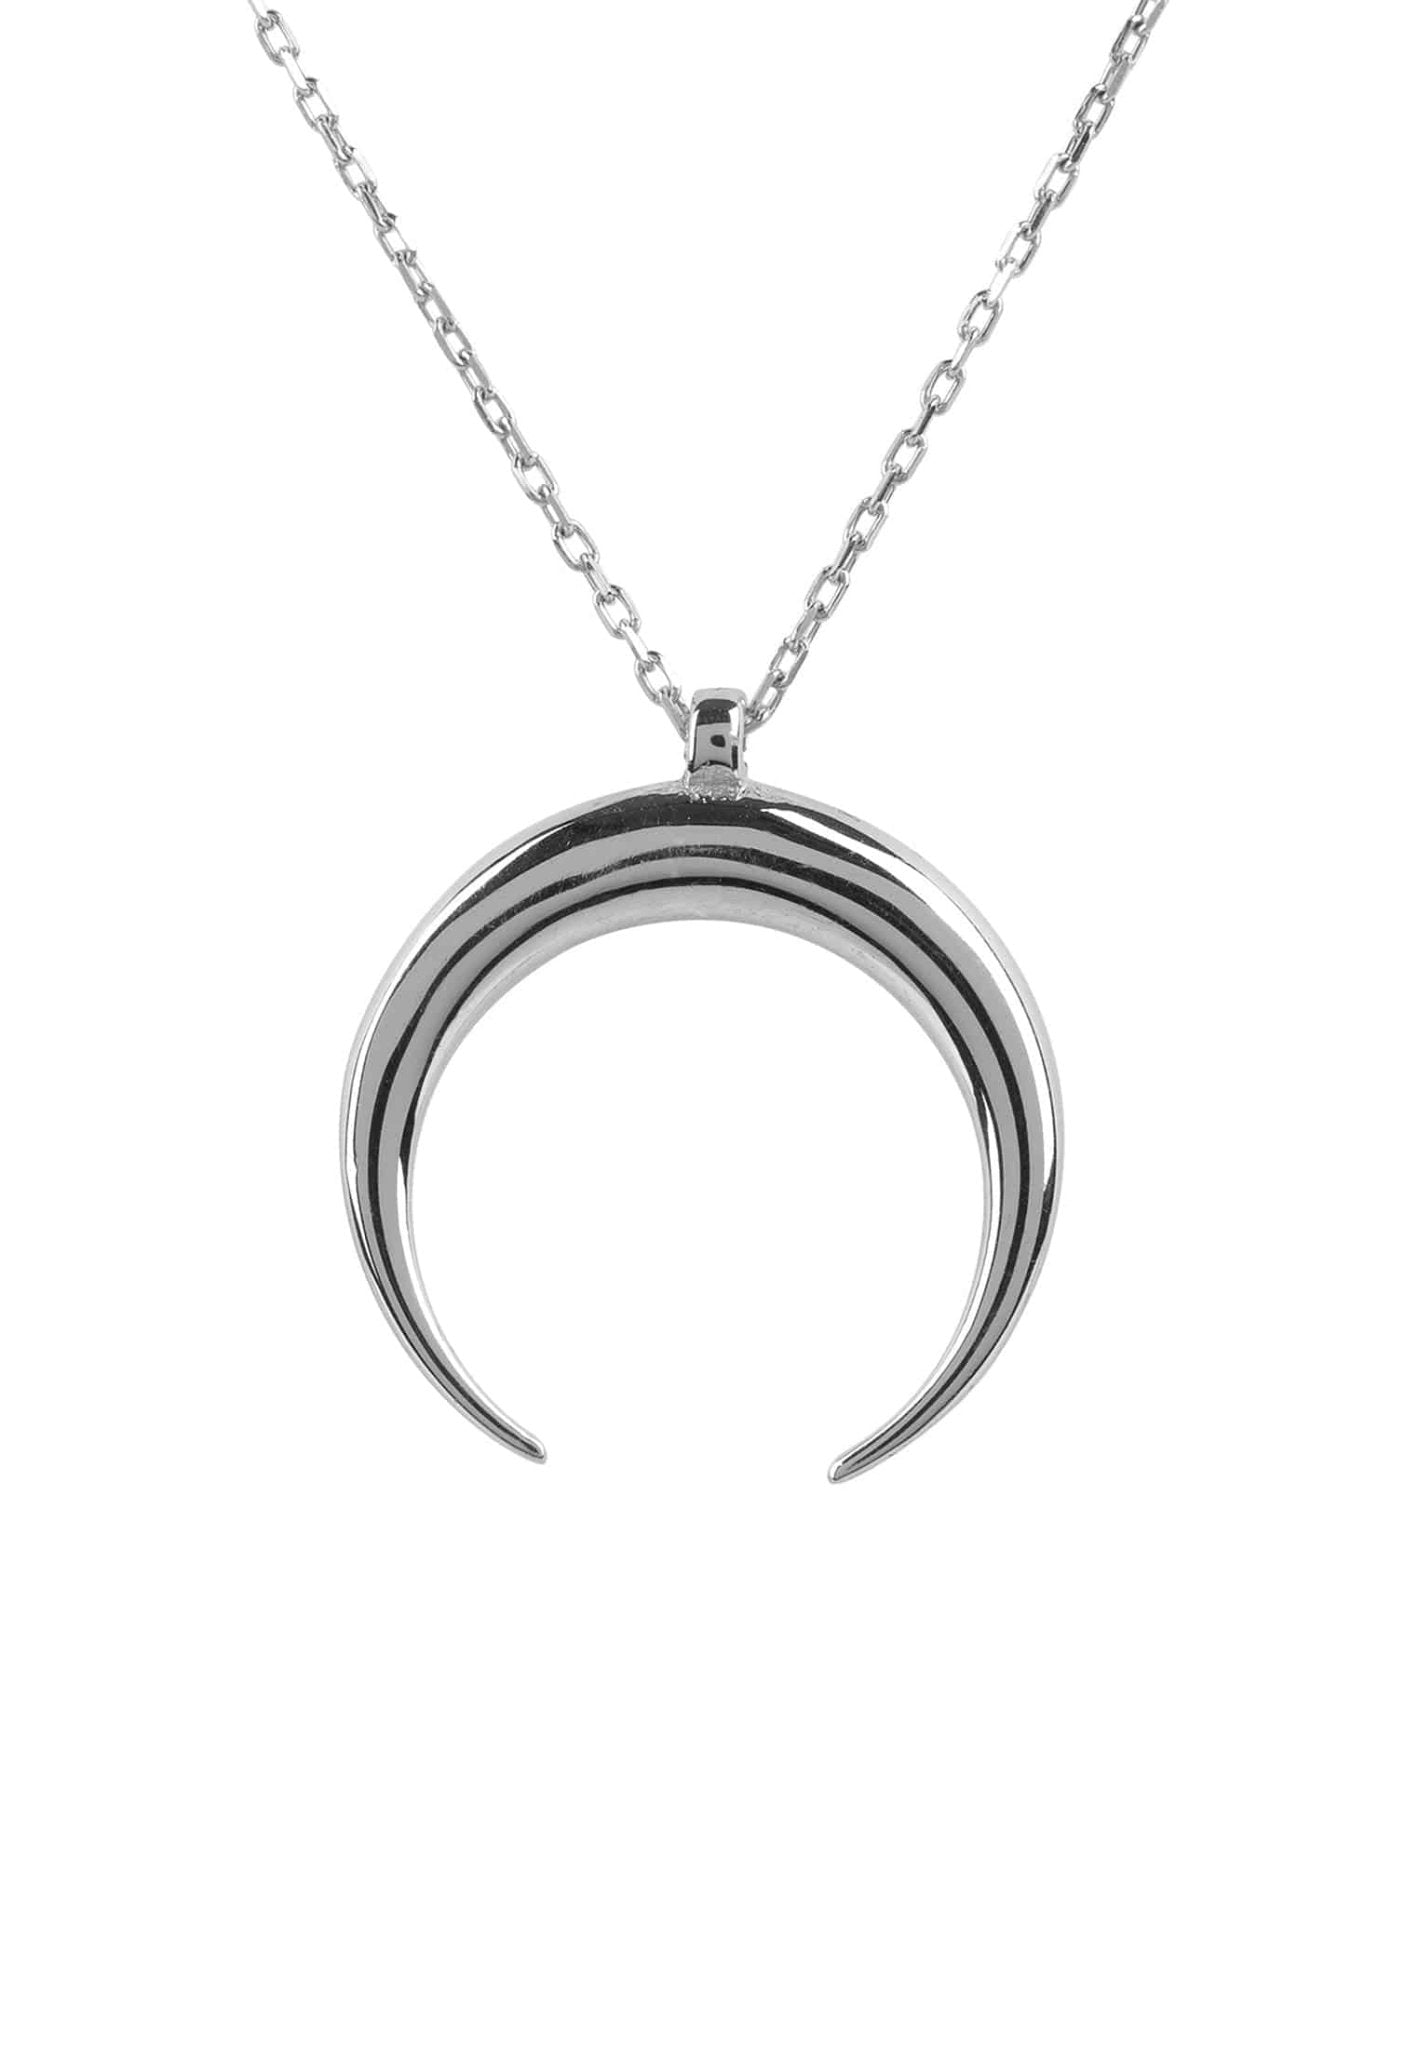 Cosmic Horn Tusk Necklace Silver - LATELITA Necklaces